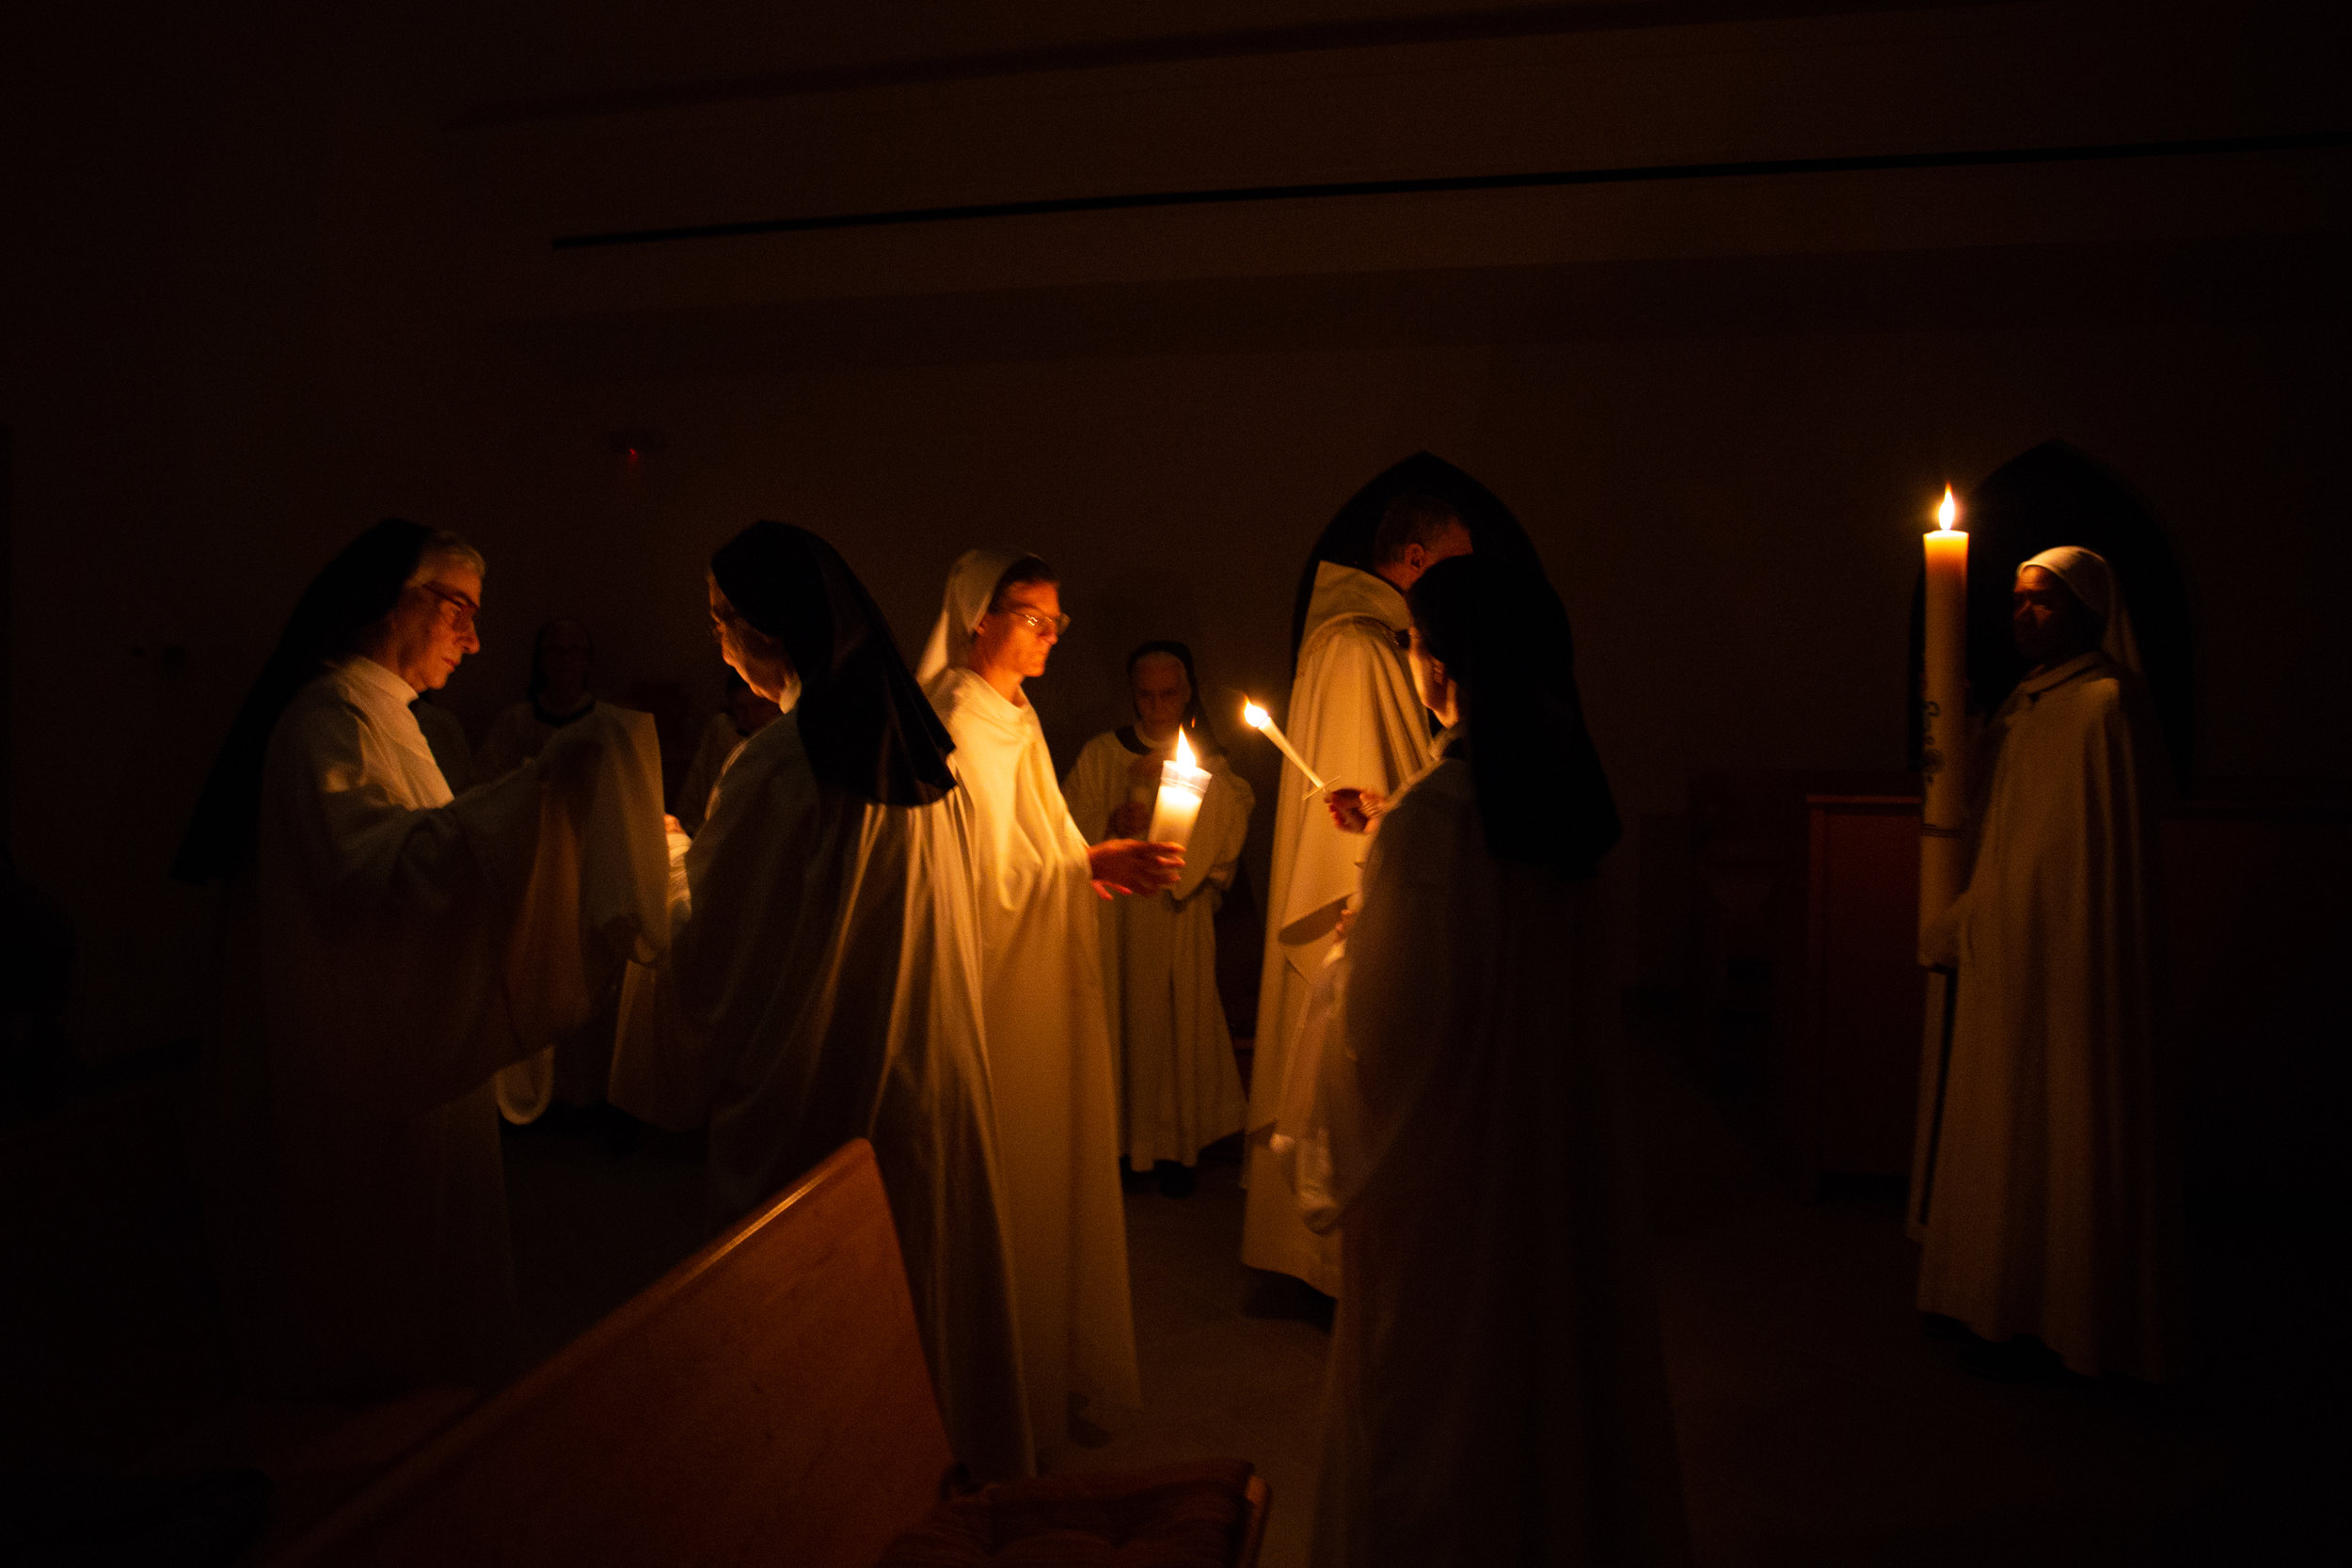  The sisters and guests stand in silence as they light candles Saturday evening April 20, 2019 in Crozet, Virginia. This ends their procession into the church for Easter mass. 